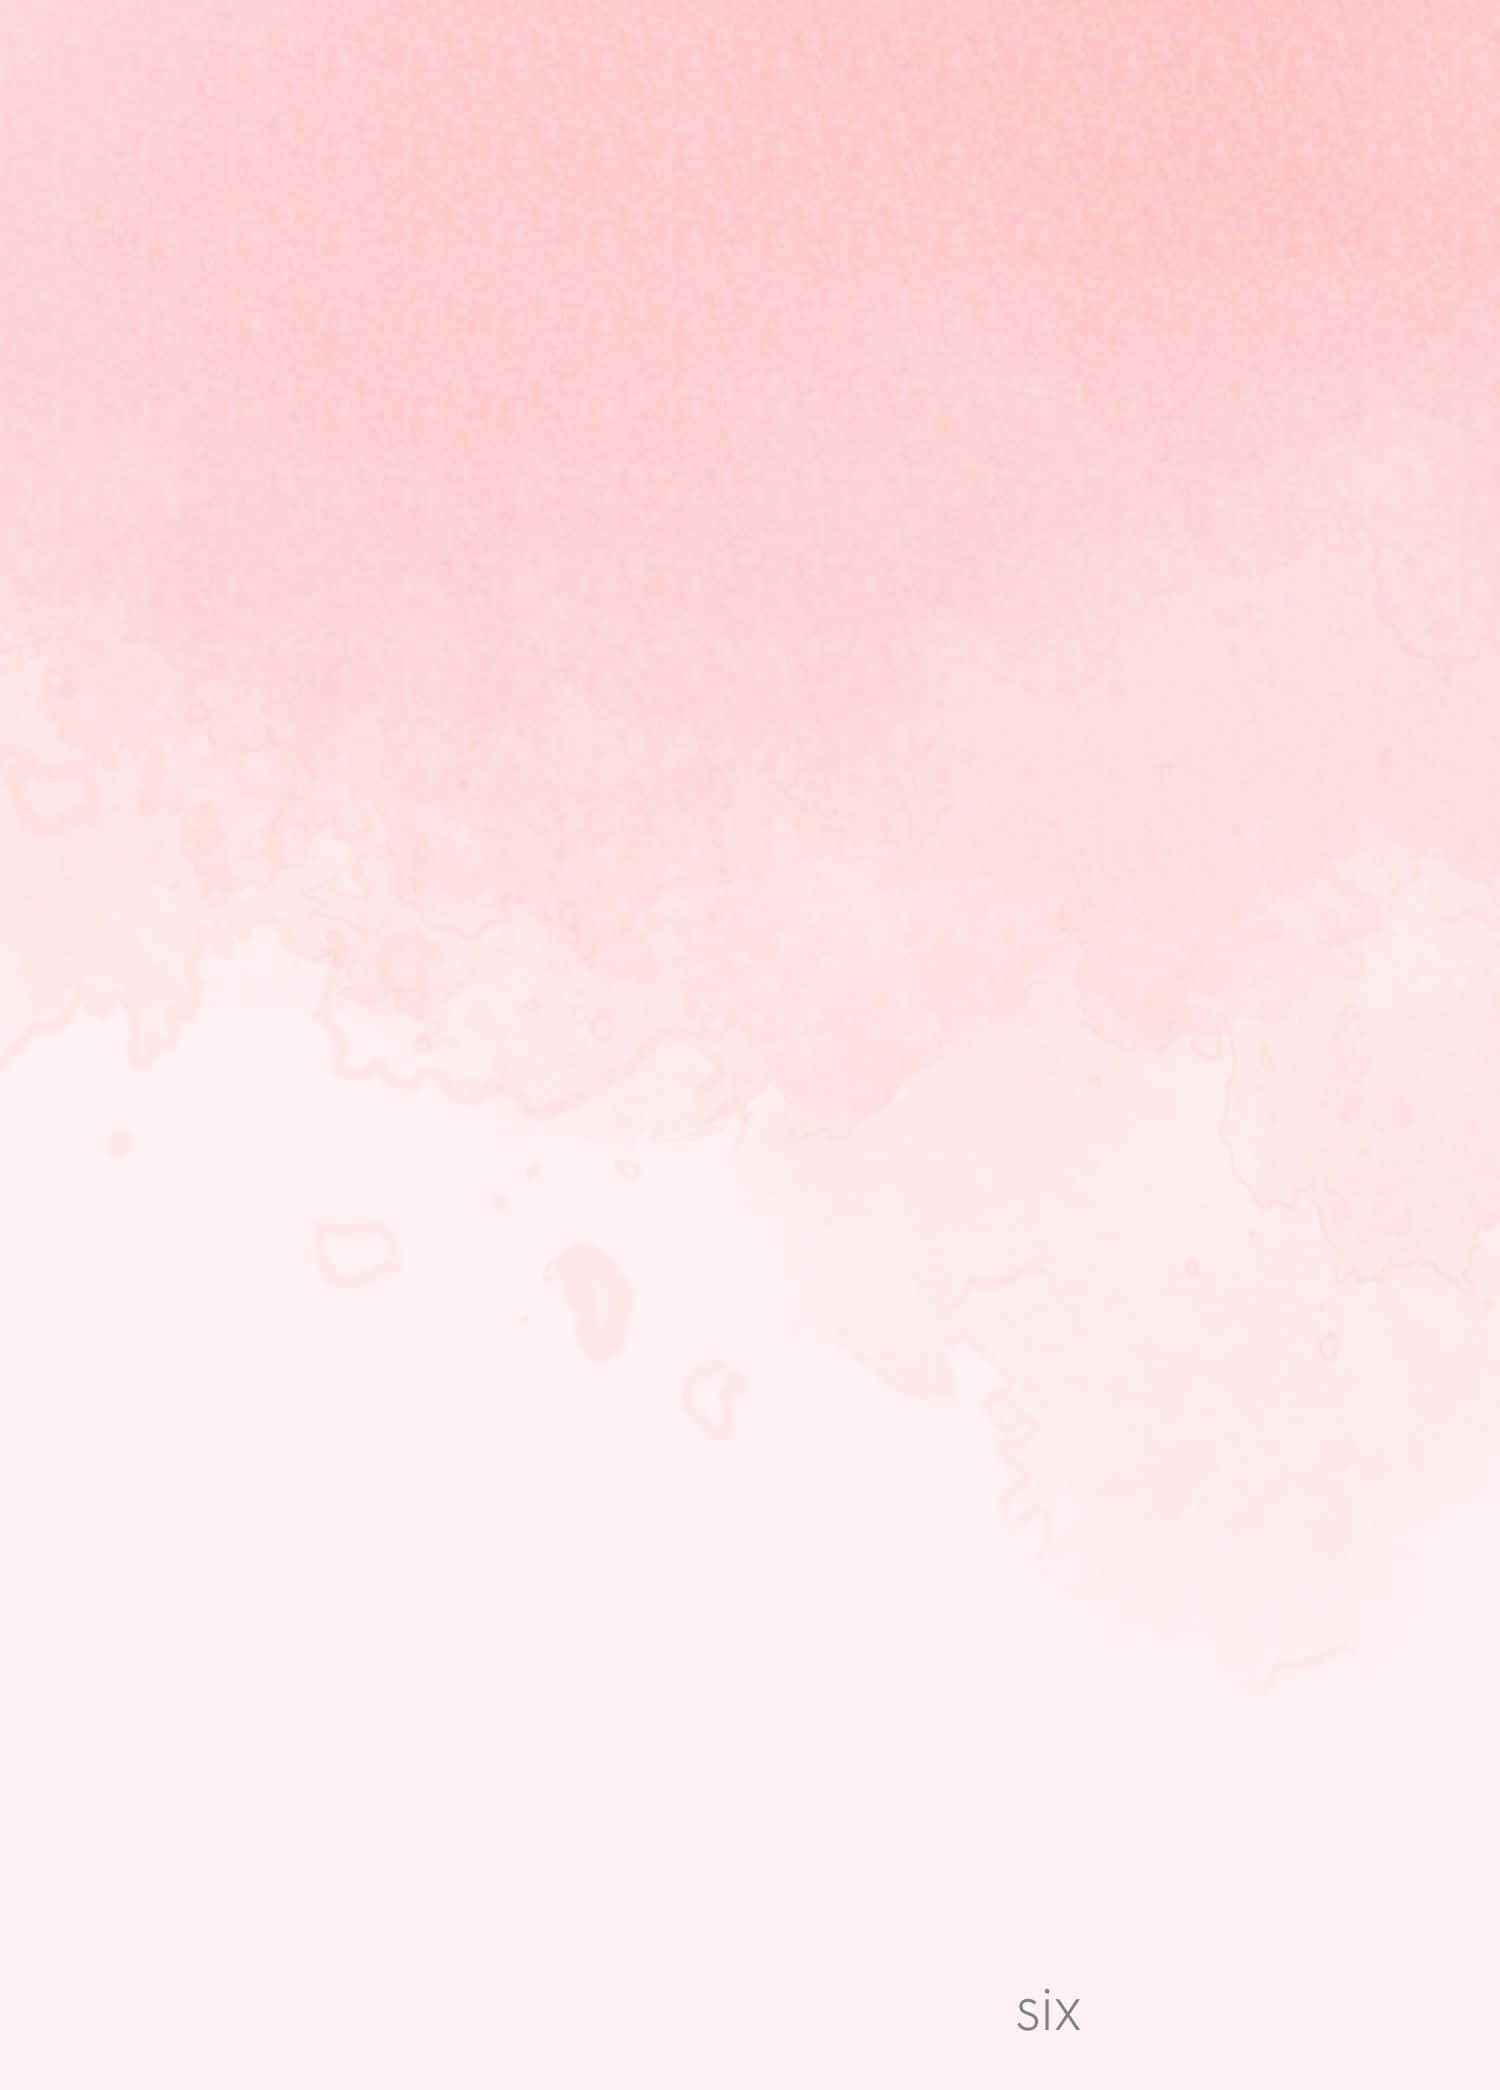 Abstract Pink Watercolor Background